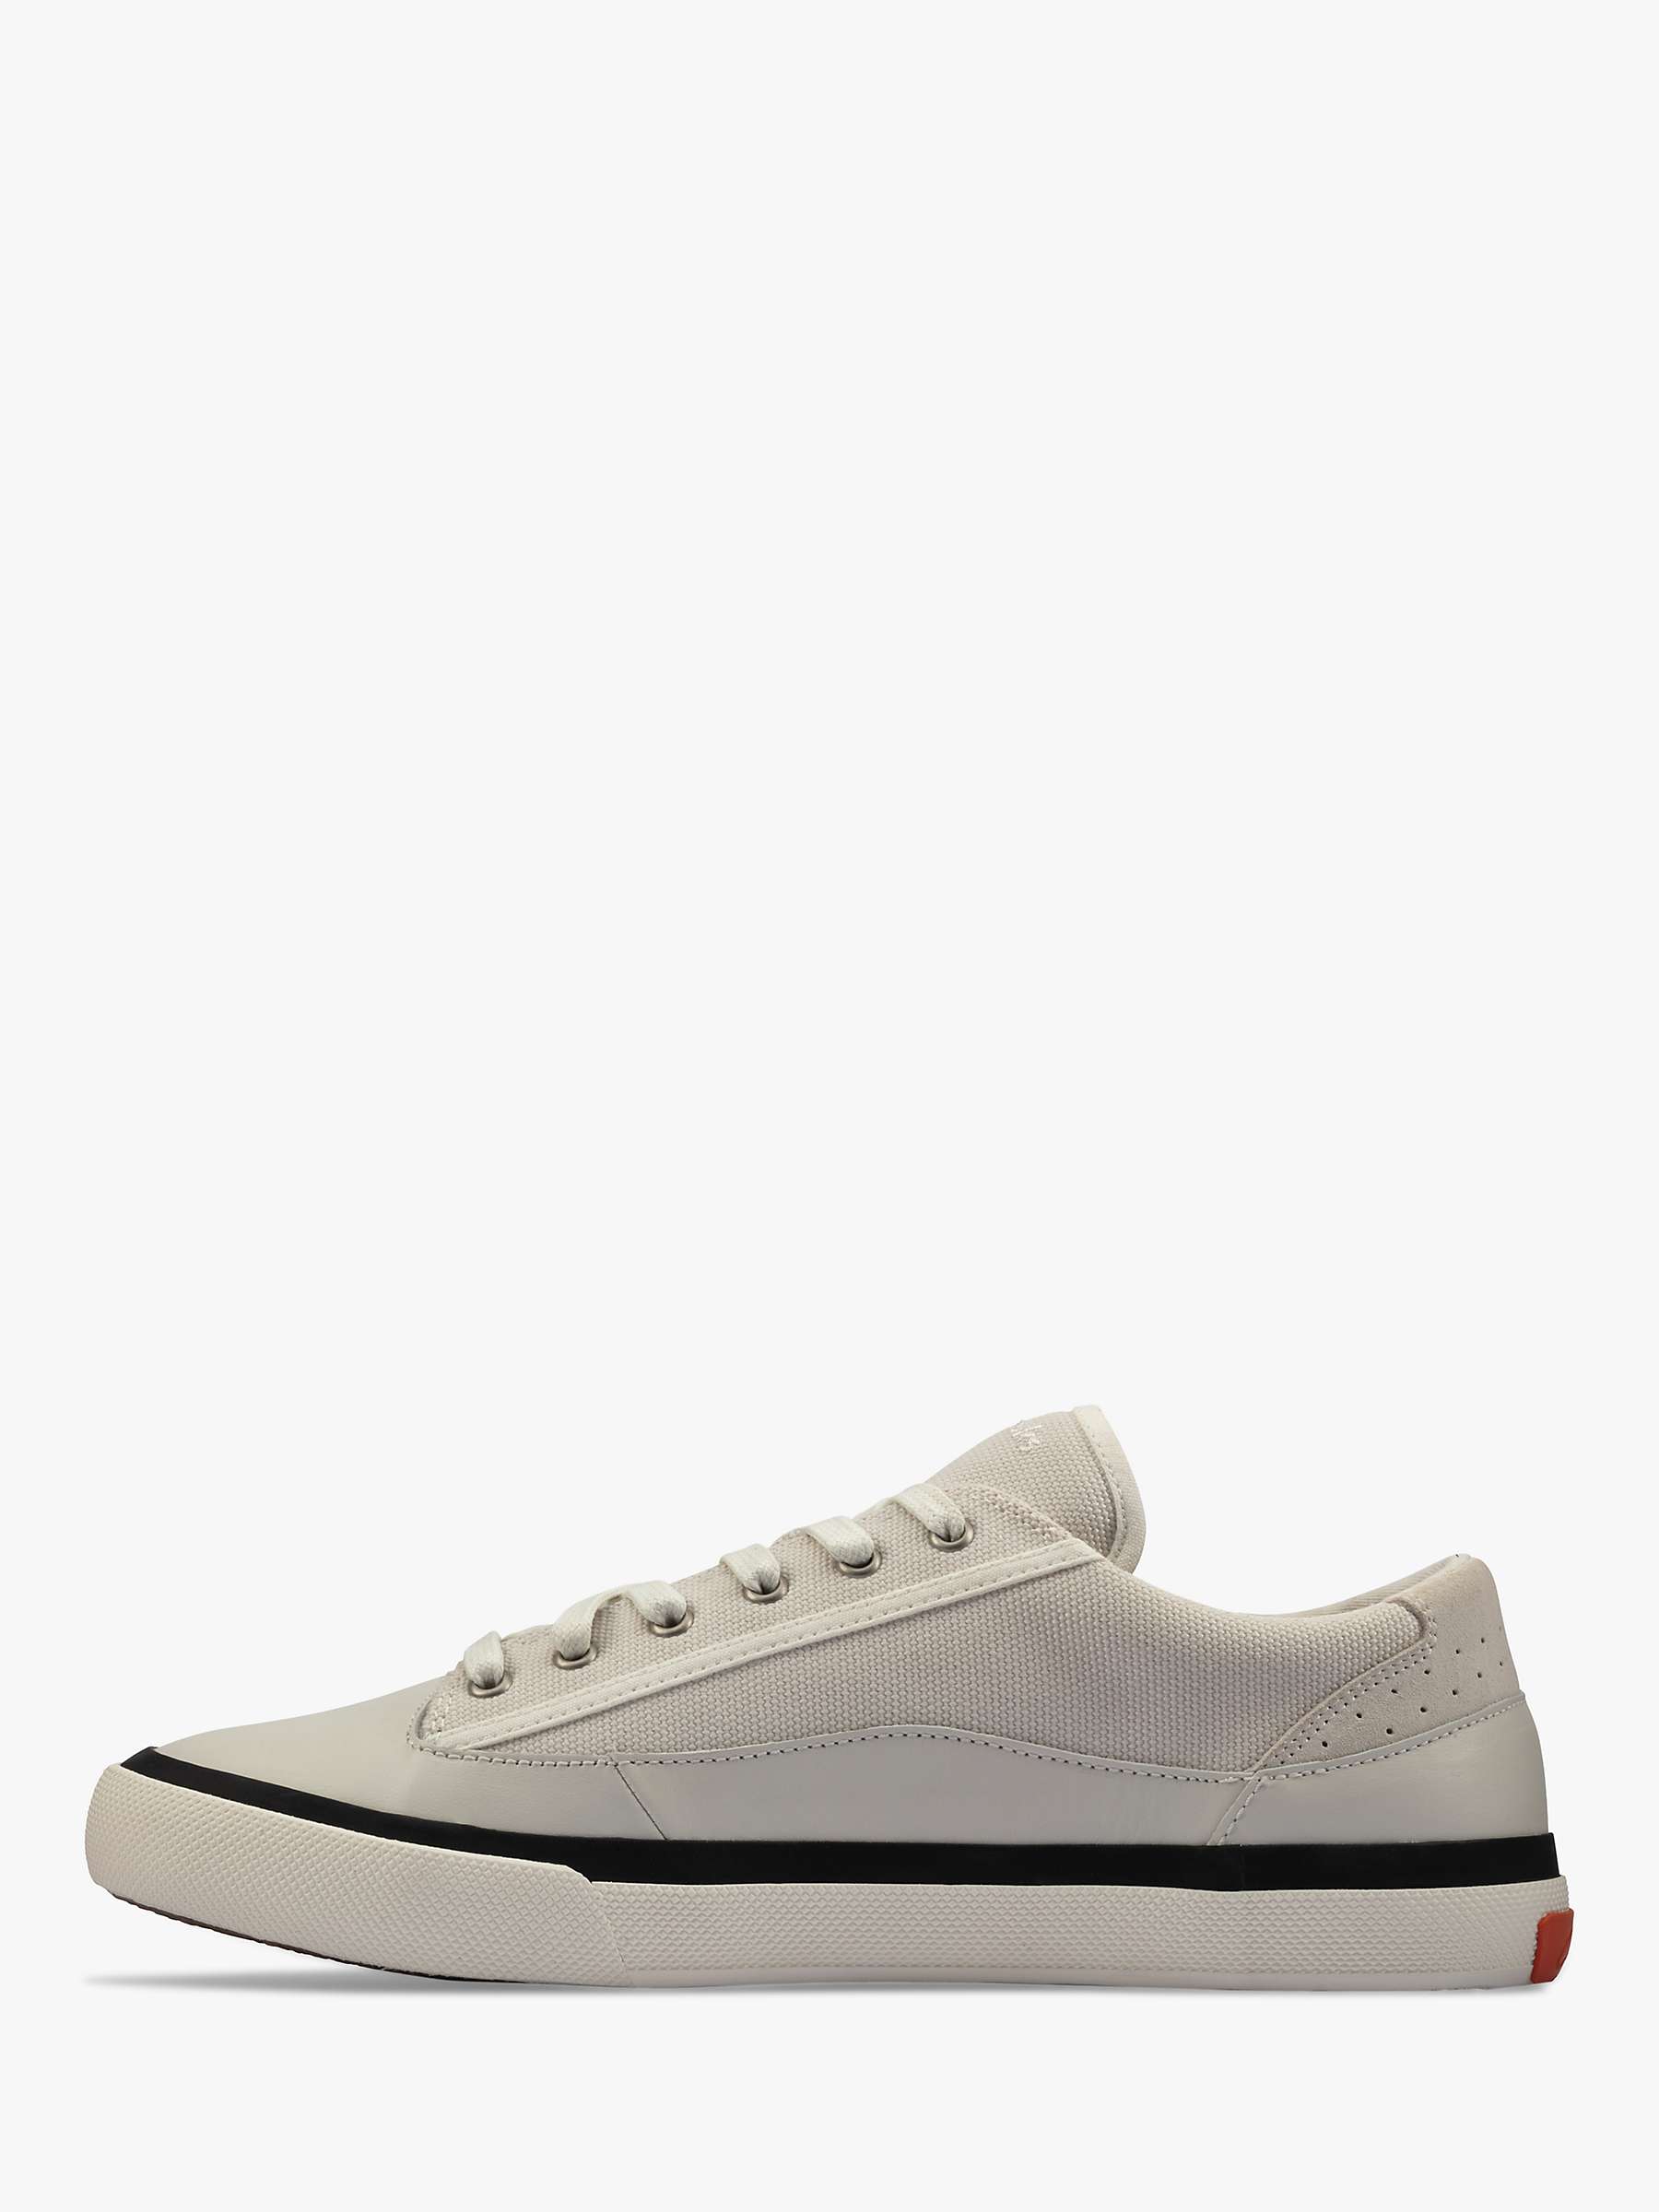 Buy Clarks Aceley Lace Canvas Trainers, White Online at johnlewis.com